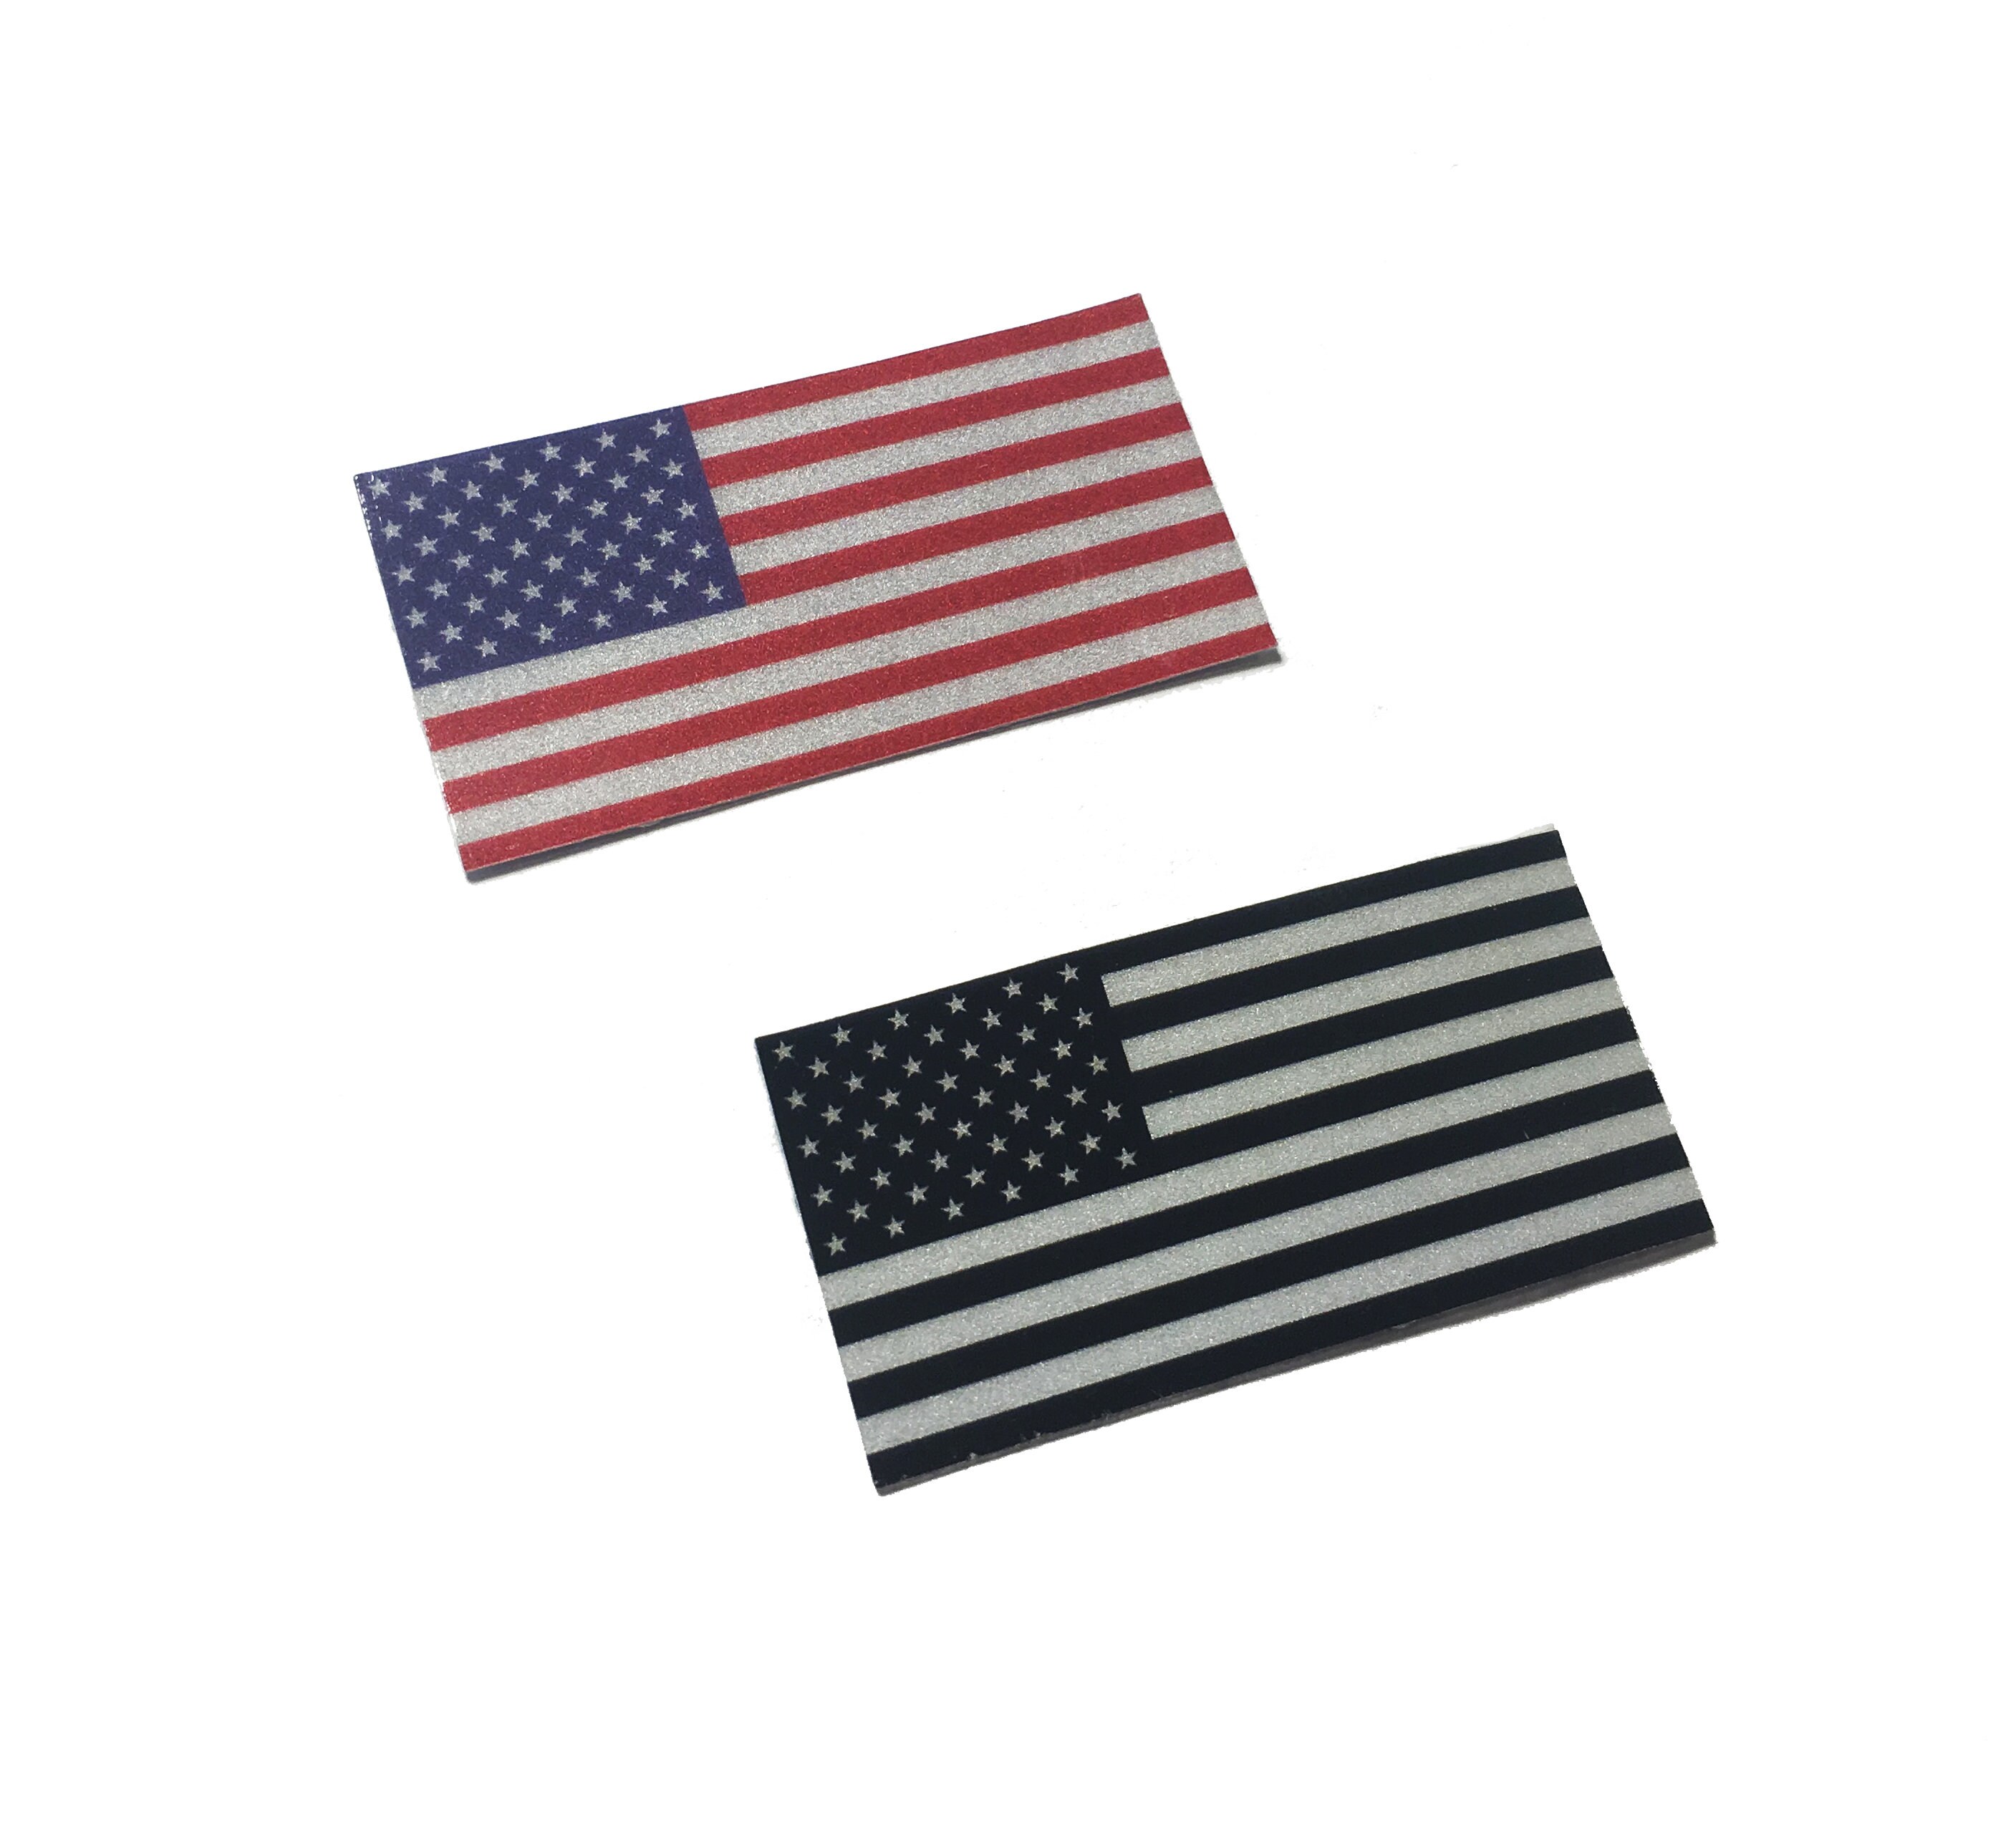 BLACK REFLECTIVE American FLAG Military Embroidered Patch Craft